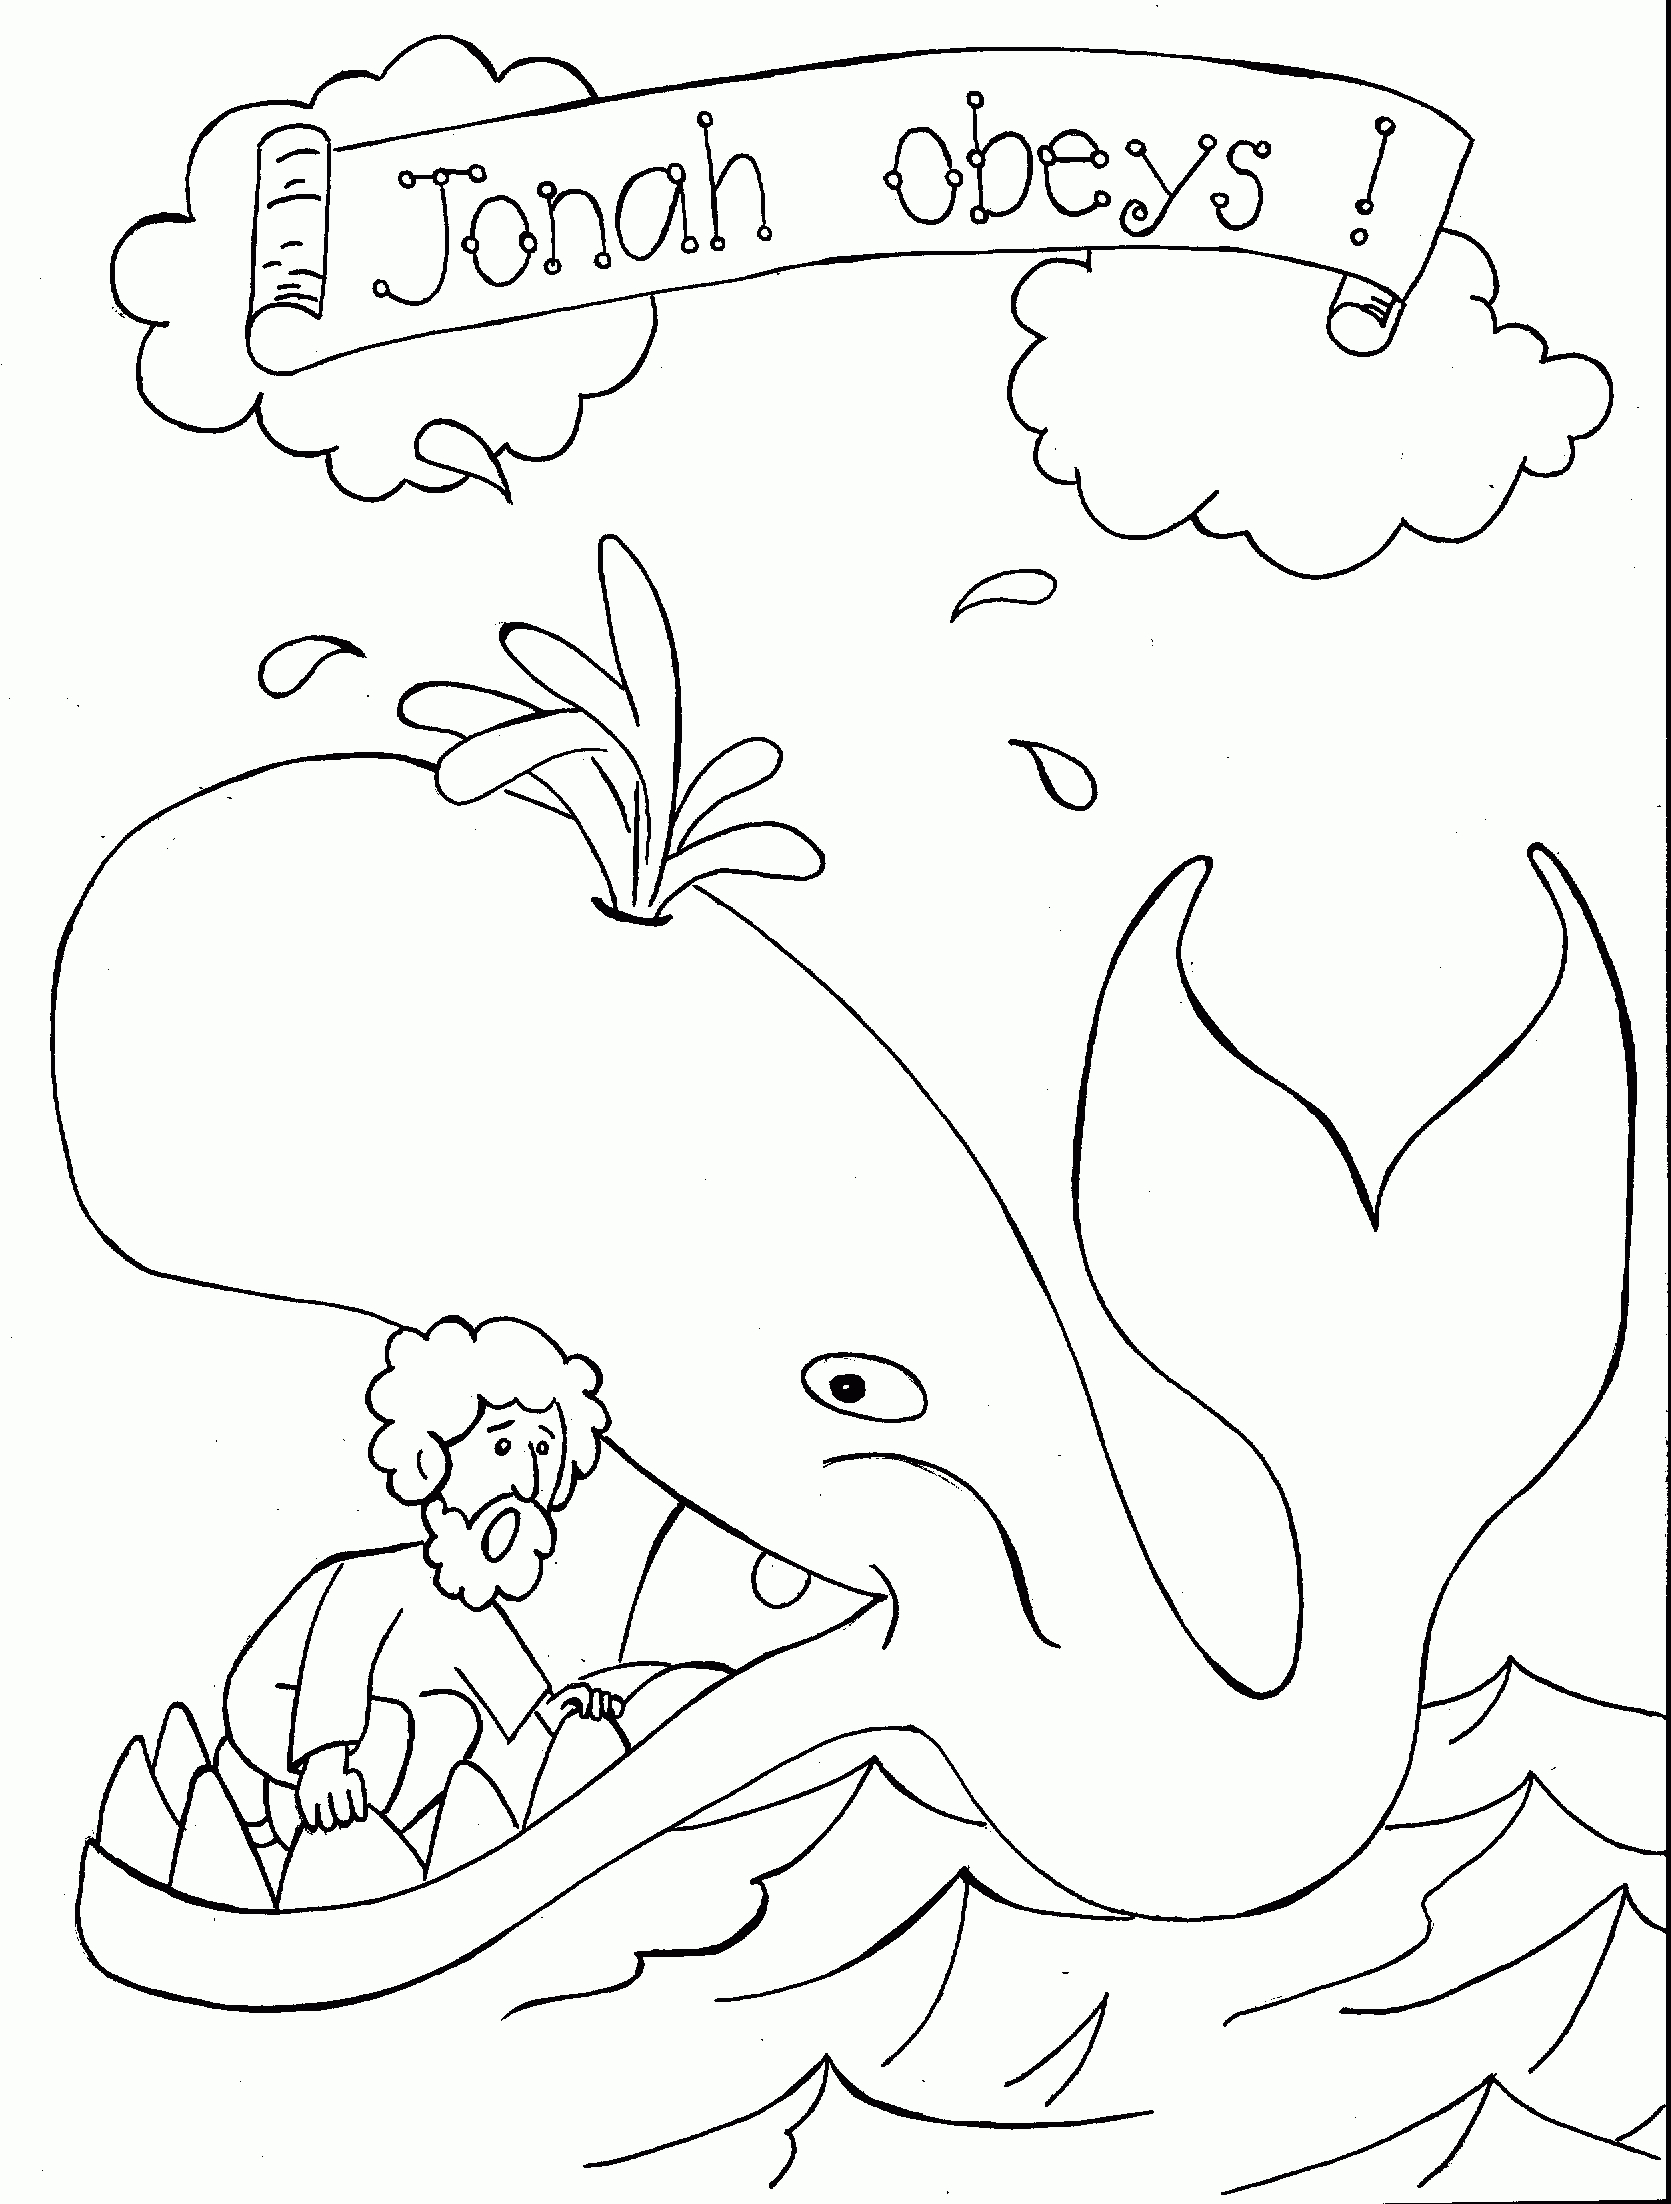 Coloring Pages: 48 Phenomenal Printable Coloring Pages Bible Stories - Free Printable Bible Story Coloring Pages